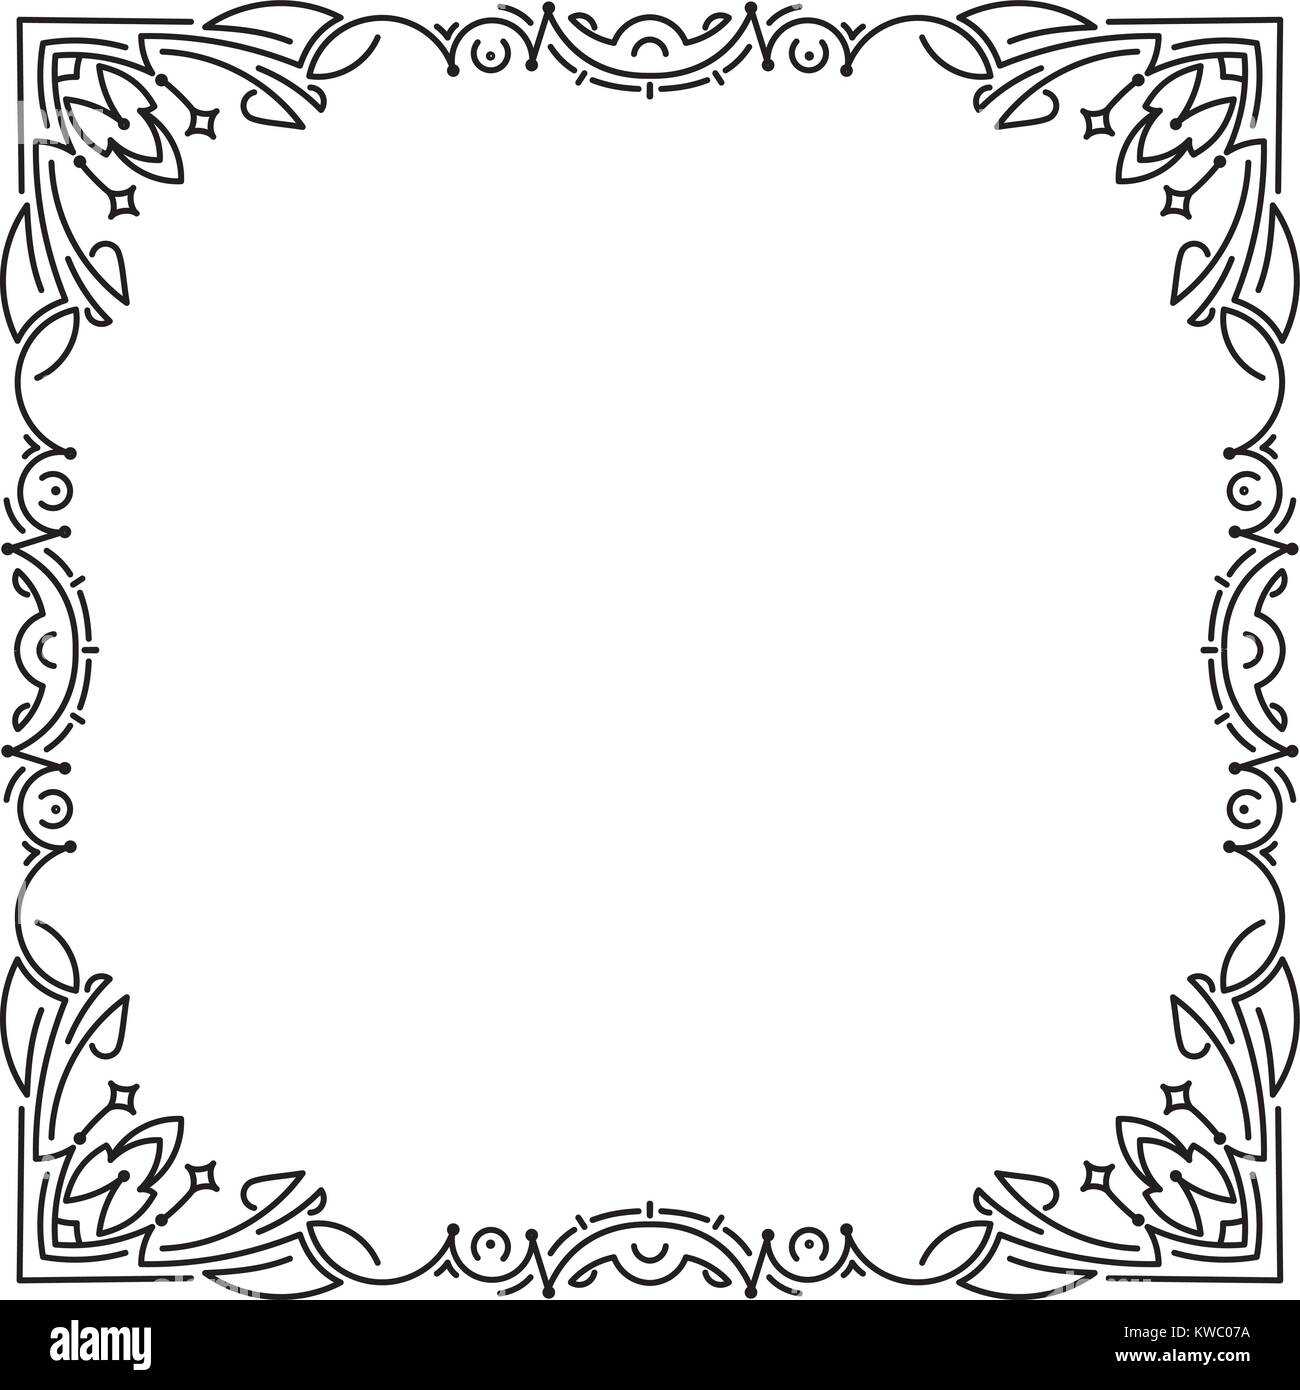 Fancy frame vector Stock Vector Images - Alamy